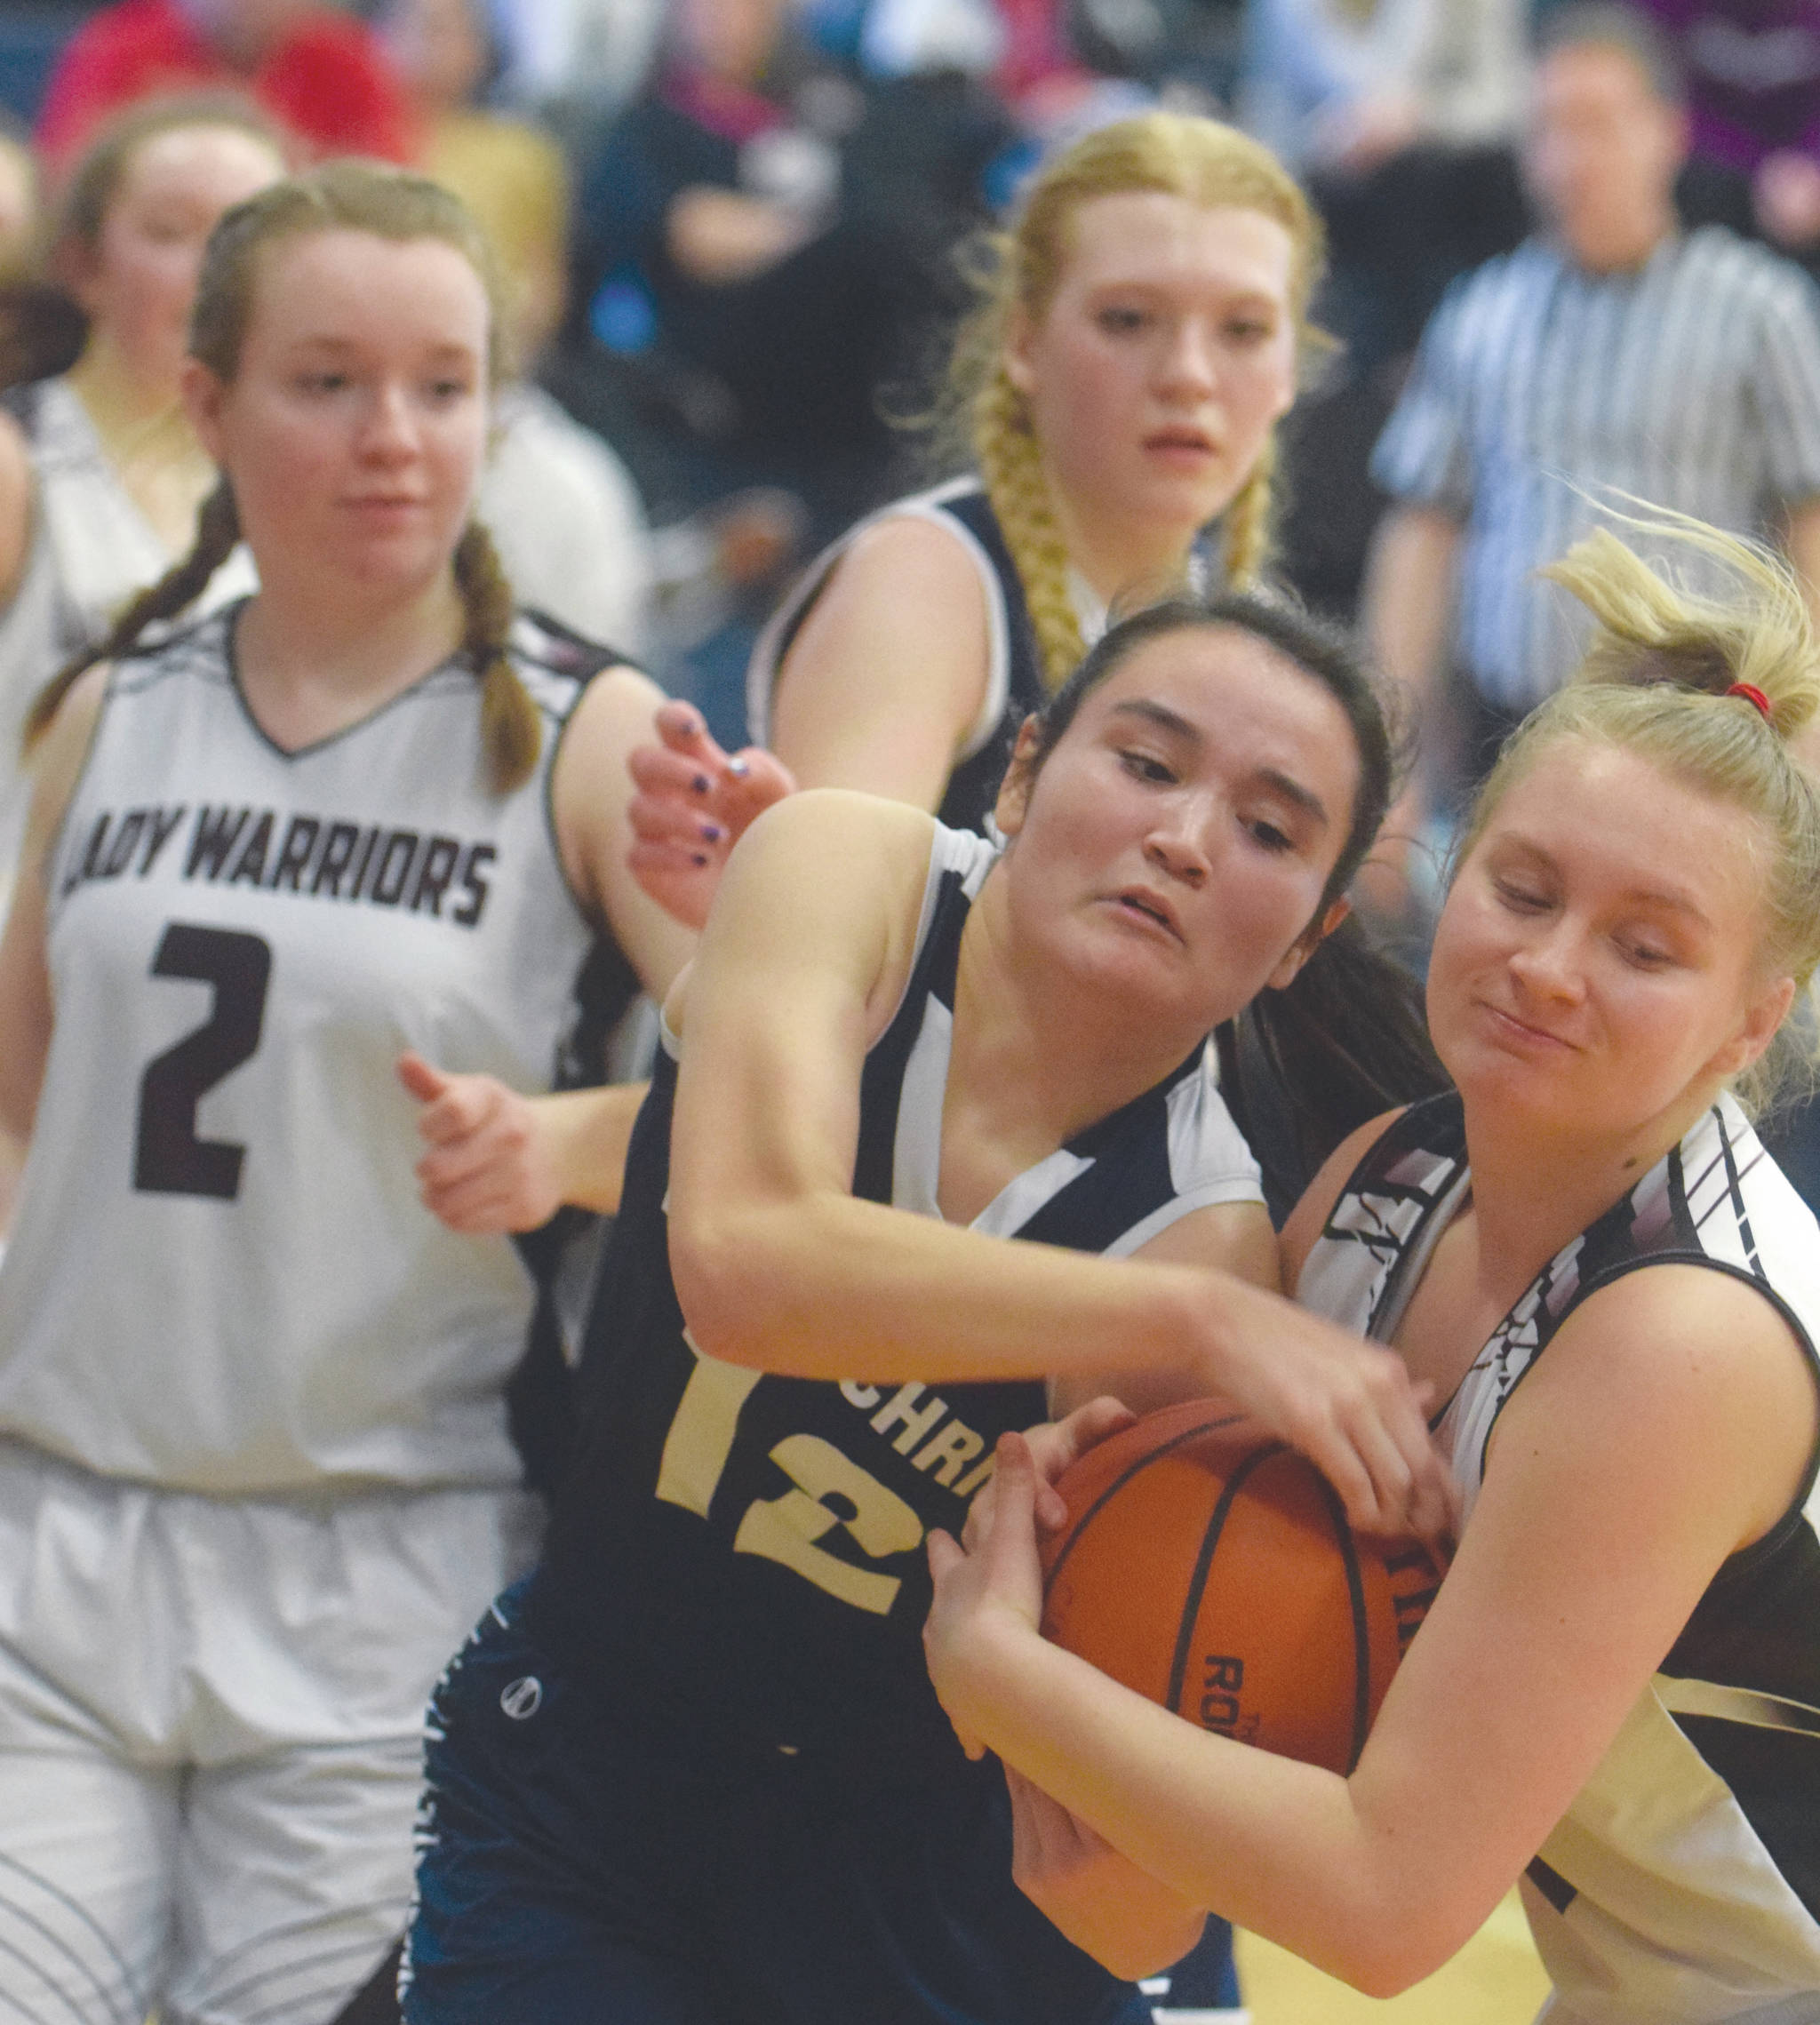 Lumen Christi’s Kaiya Thornsness and Nikolaevsk’s Kerianna Lasiter battle for the ball Thursday, March 5, 2020, at the Peninsula Conference basketball tournament at Cook Inlet Academy in Soldotna, Alaska. (Photo by Jeff Helminiak/Peninsula Clarion)